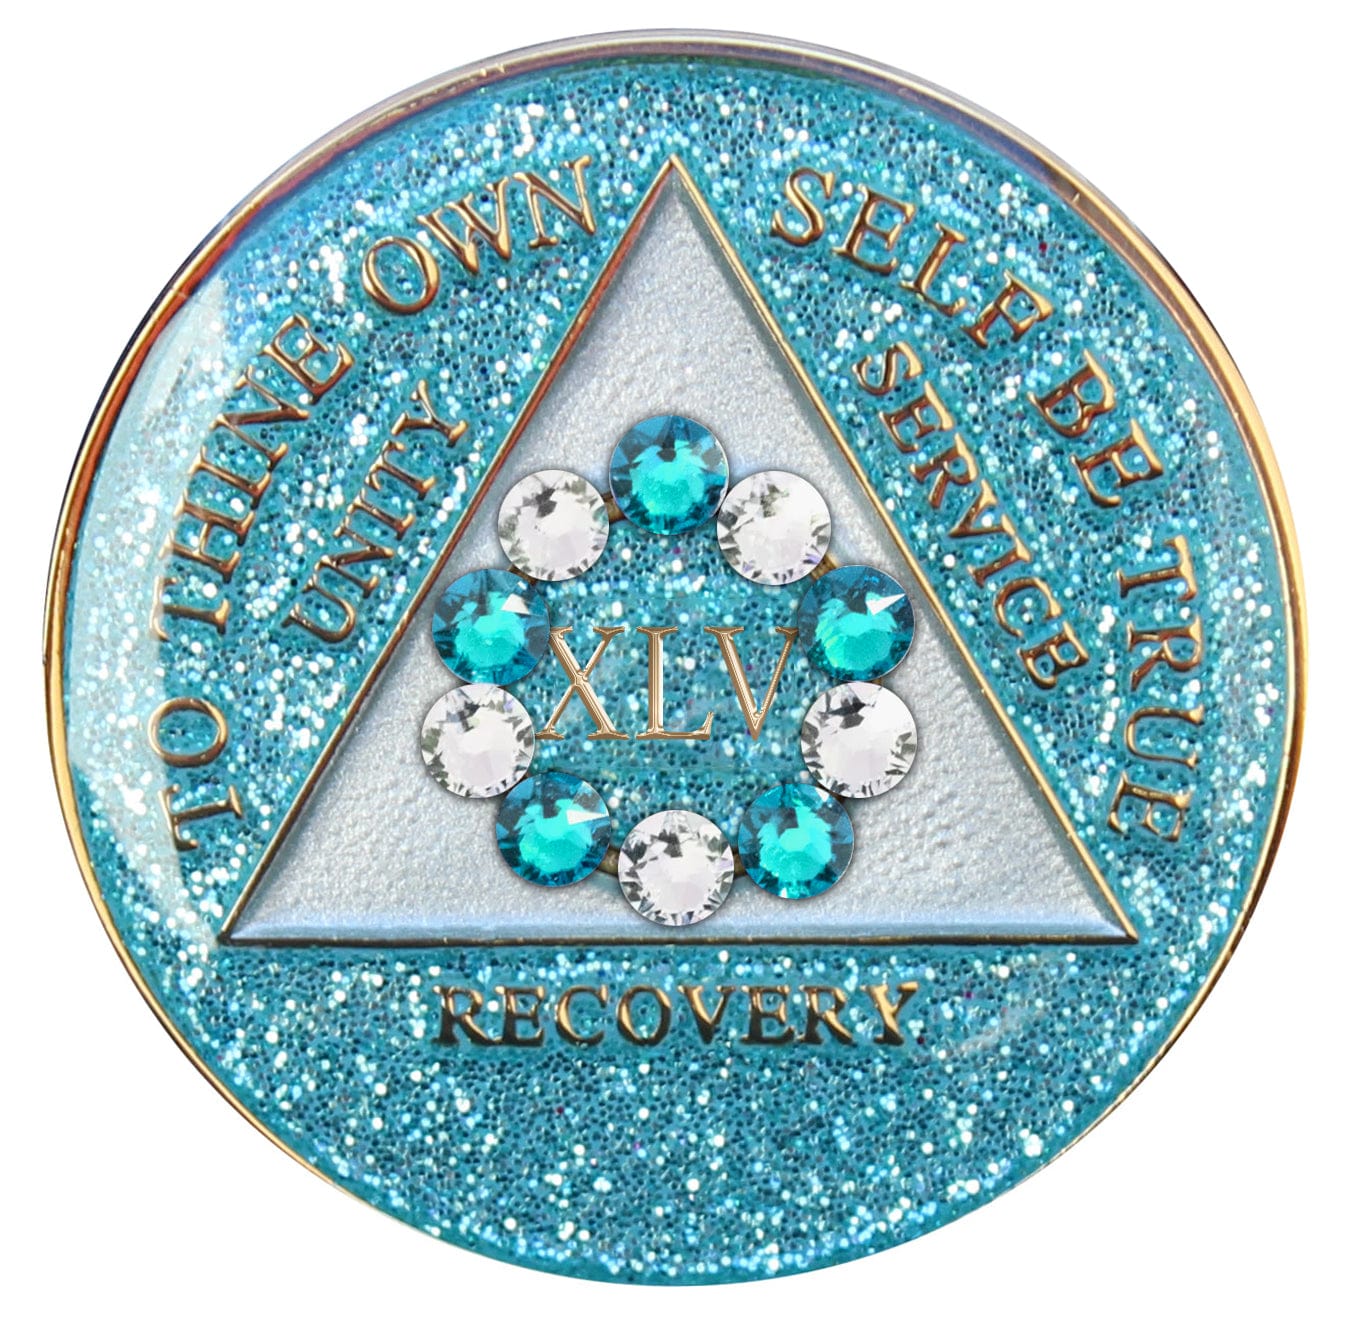 45 Year Deep-sea Aqua glitter 10th step AA medallion with 5 blue genuine crystals and 5 clear genuine crystal, formed in a circle around the year, to thine own self be true, triangle in the center and unity, service, recovery, along with rim of medallion are slightly raised in 14k gold, the center of the triangle is pearl white with the circle being aqua glitter, all emphasizing action and reflection.